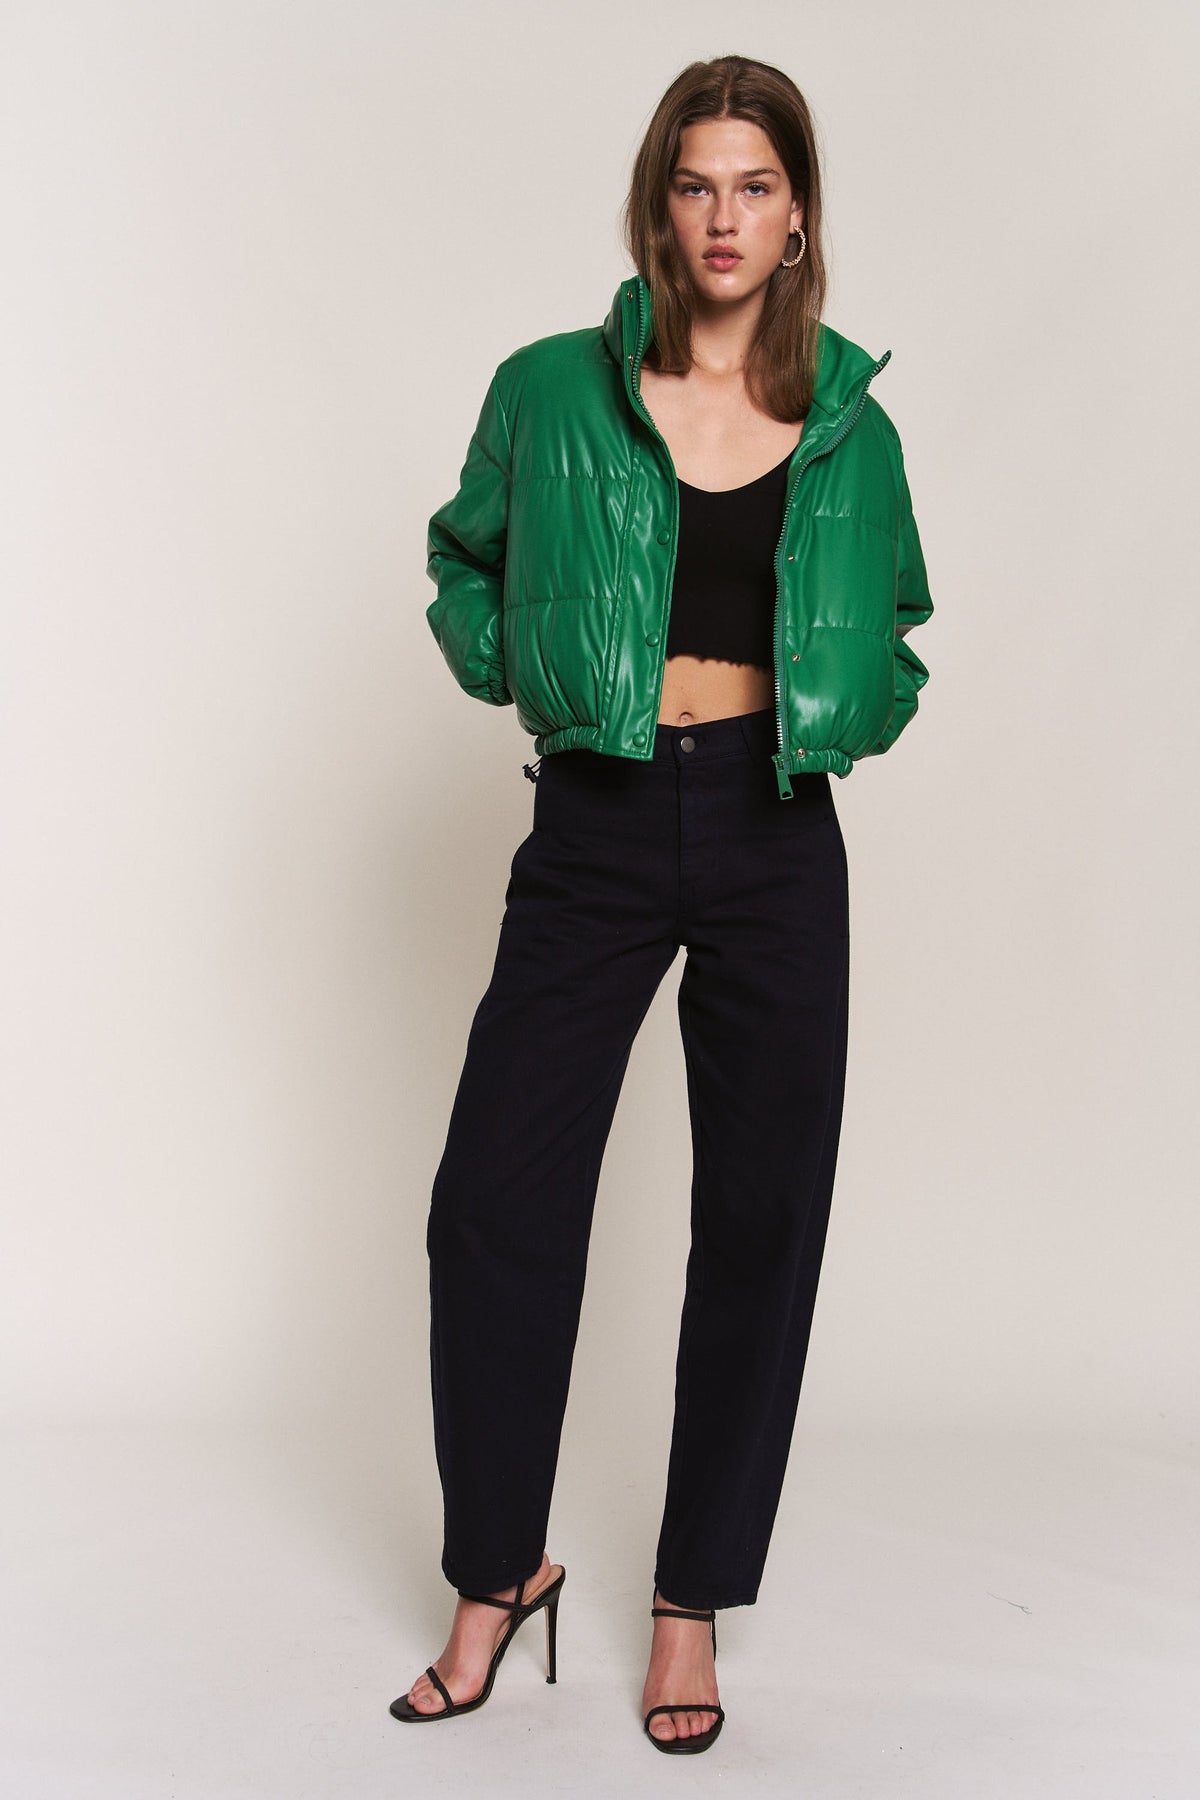 J.NNA | Green Faux Leather Puffer Jacket | Sweetest Stitch Online 